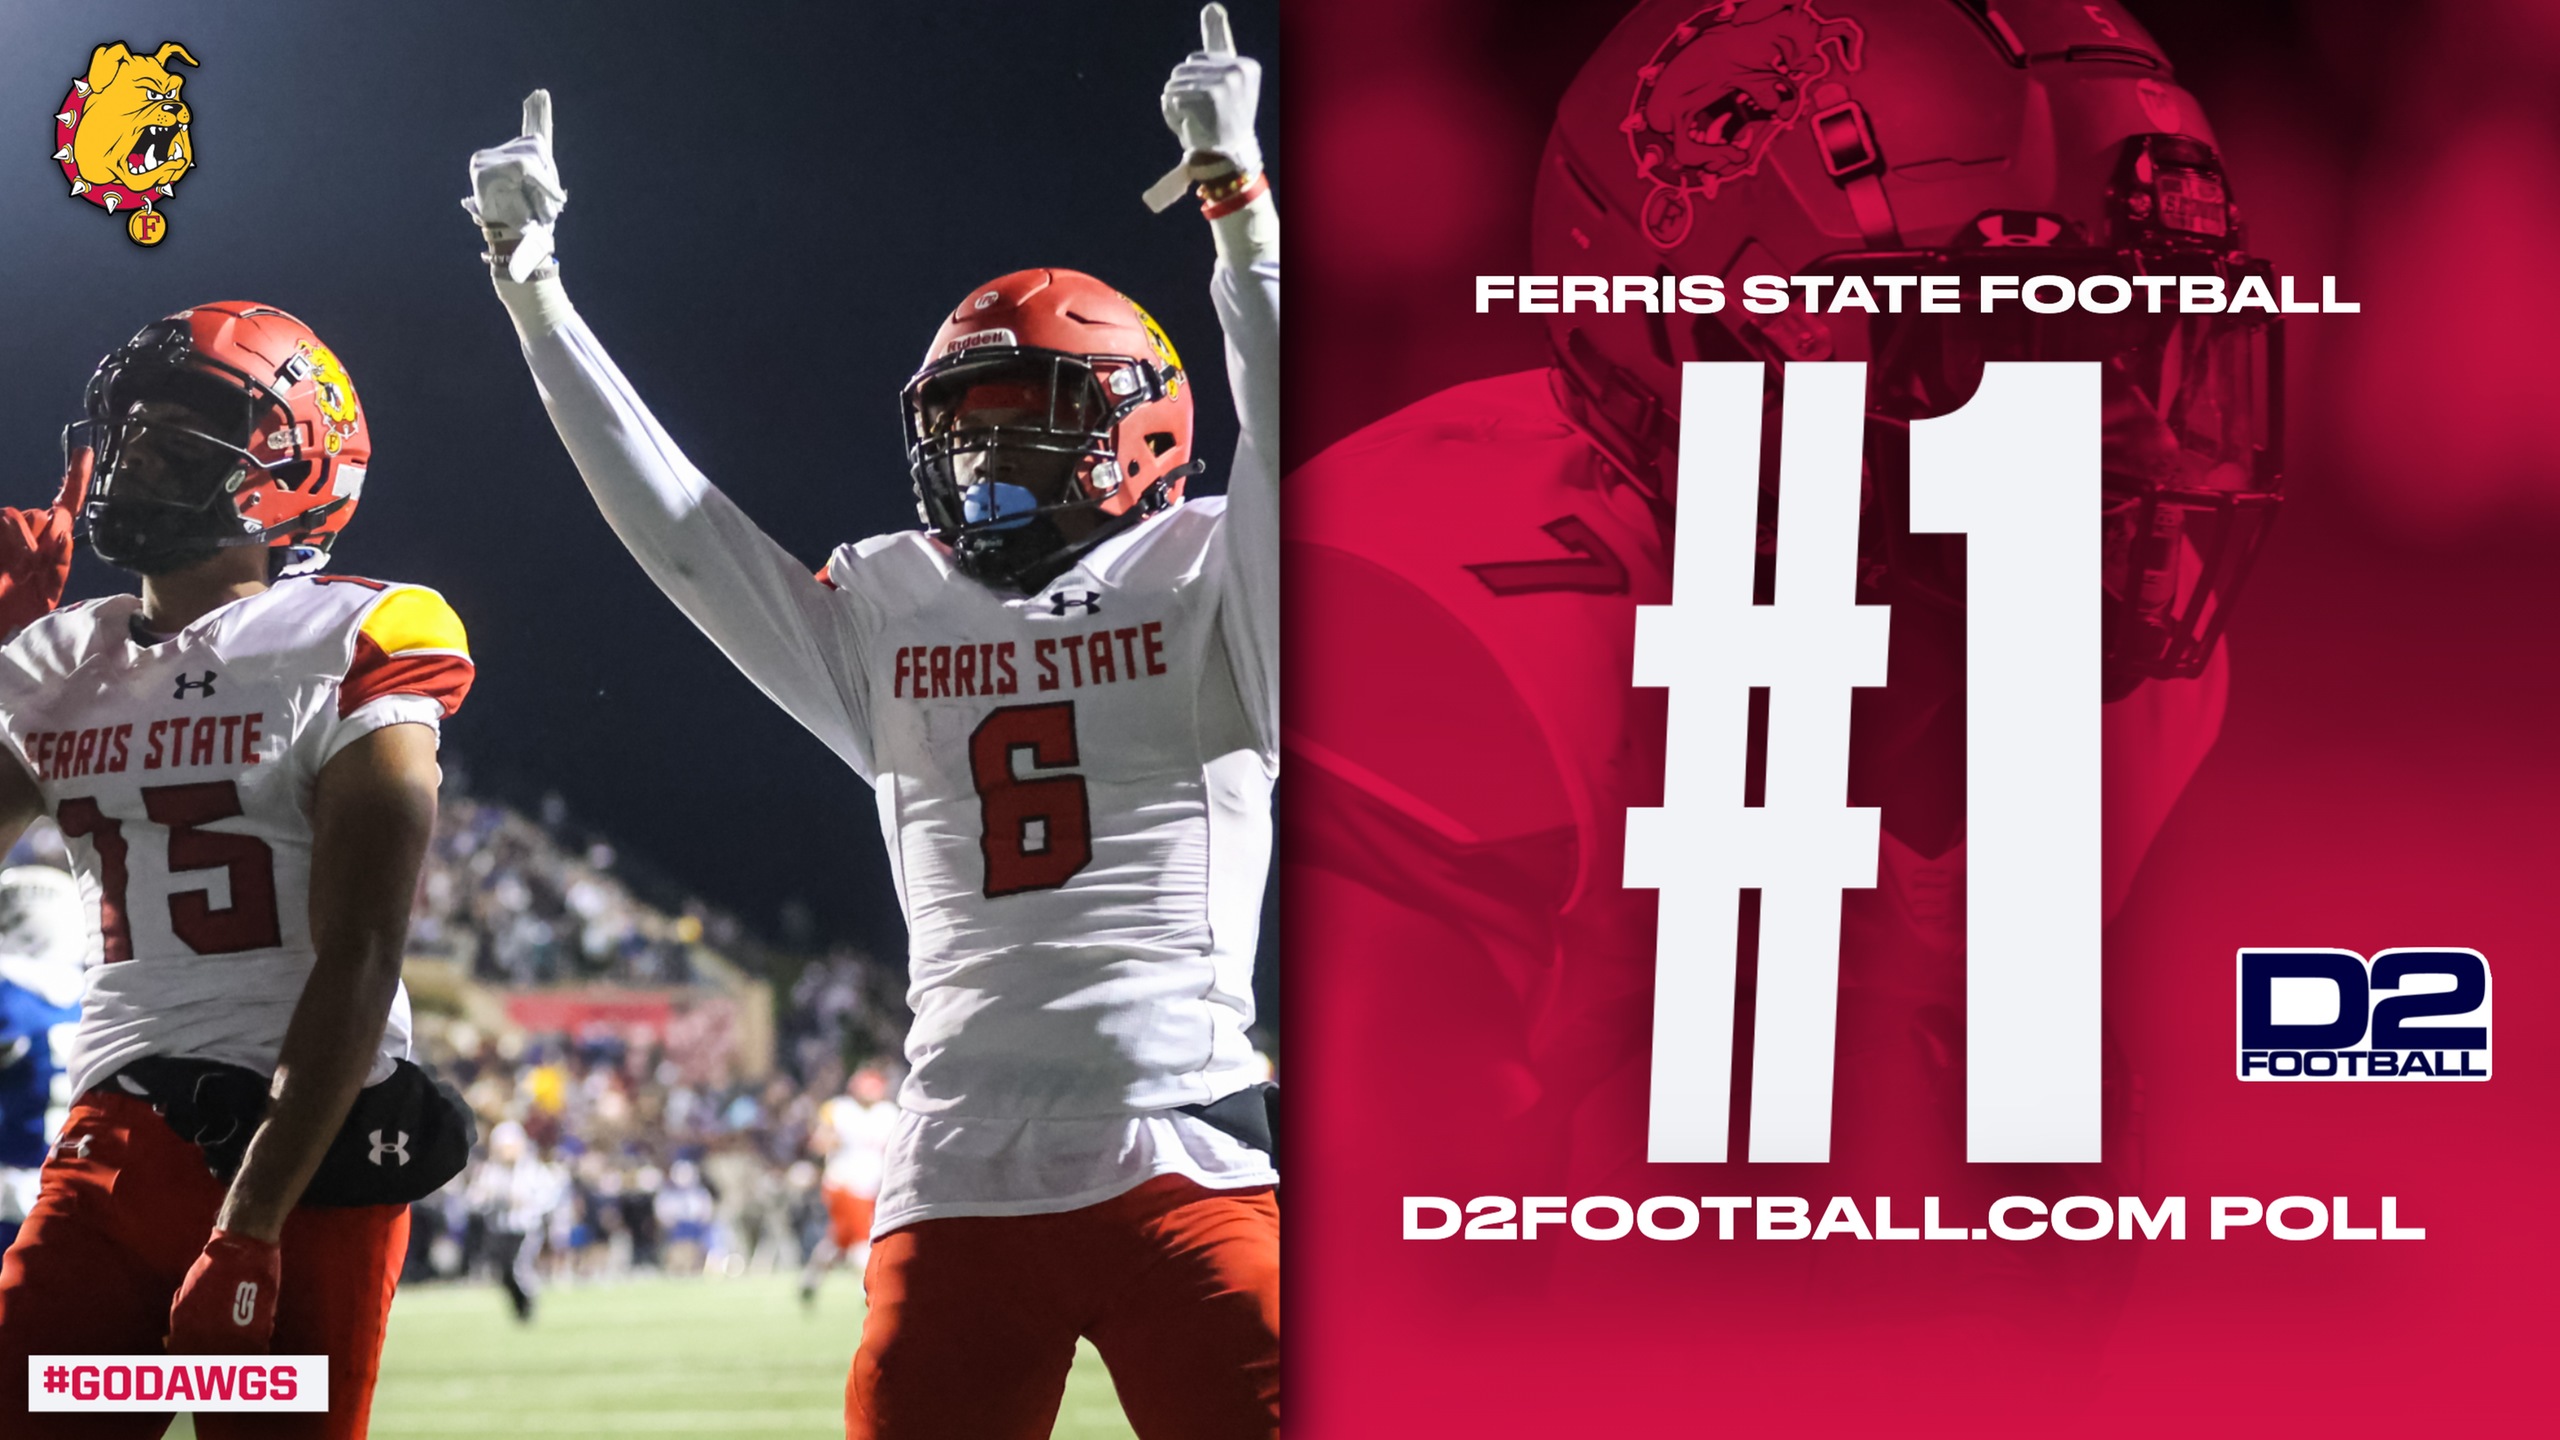 Ferris State Tabbed First Nationally By D2Football And Is Nation's Consensus #1 Team